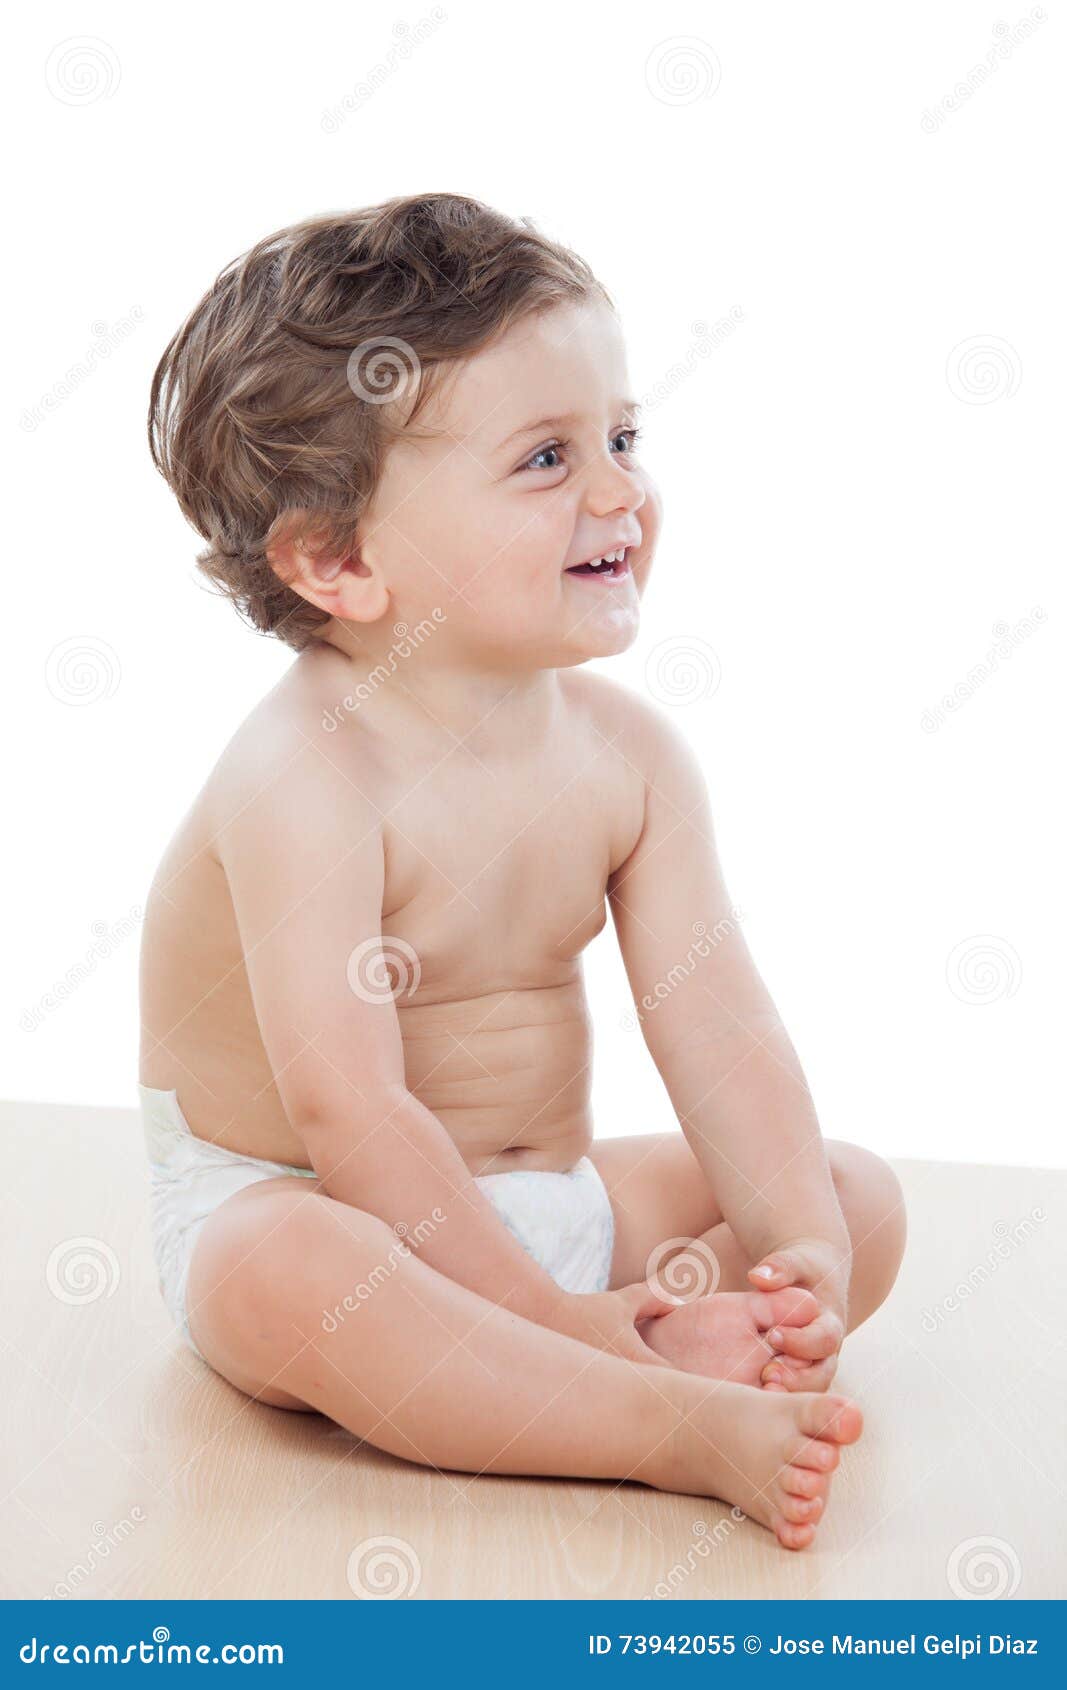 Baby With One Years Old Doing Funny Gestures Stock Photo 